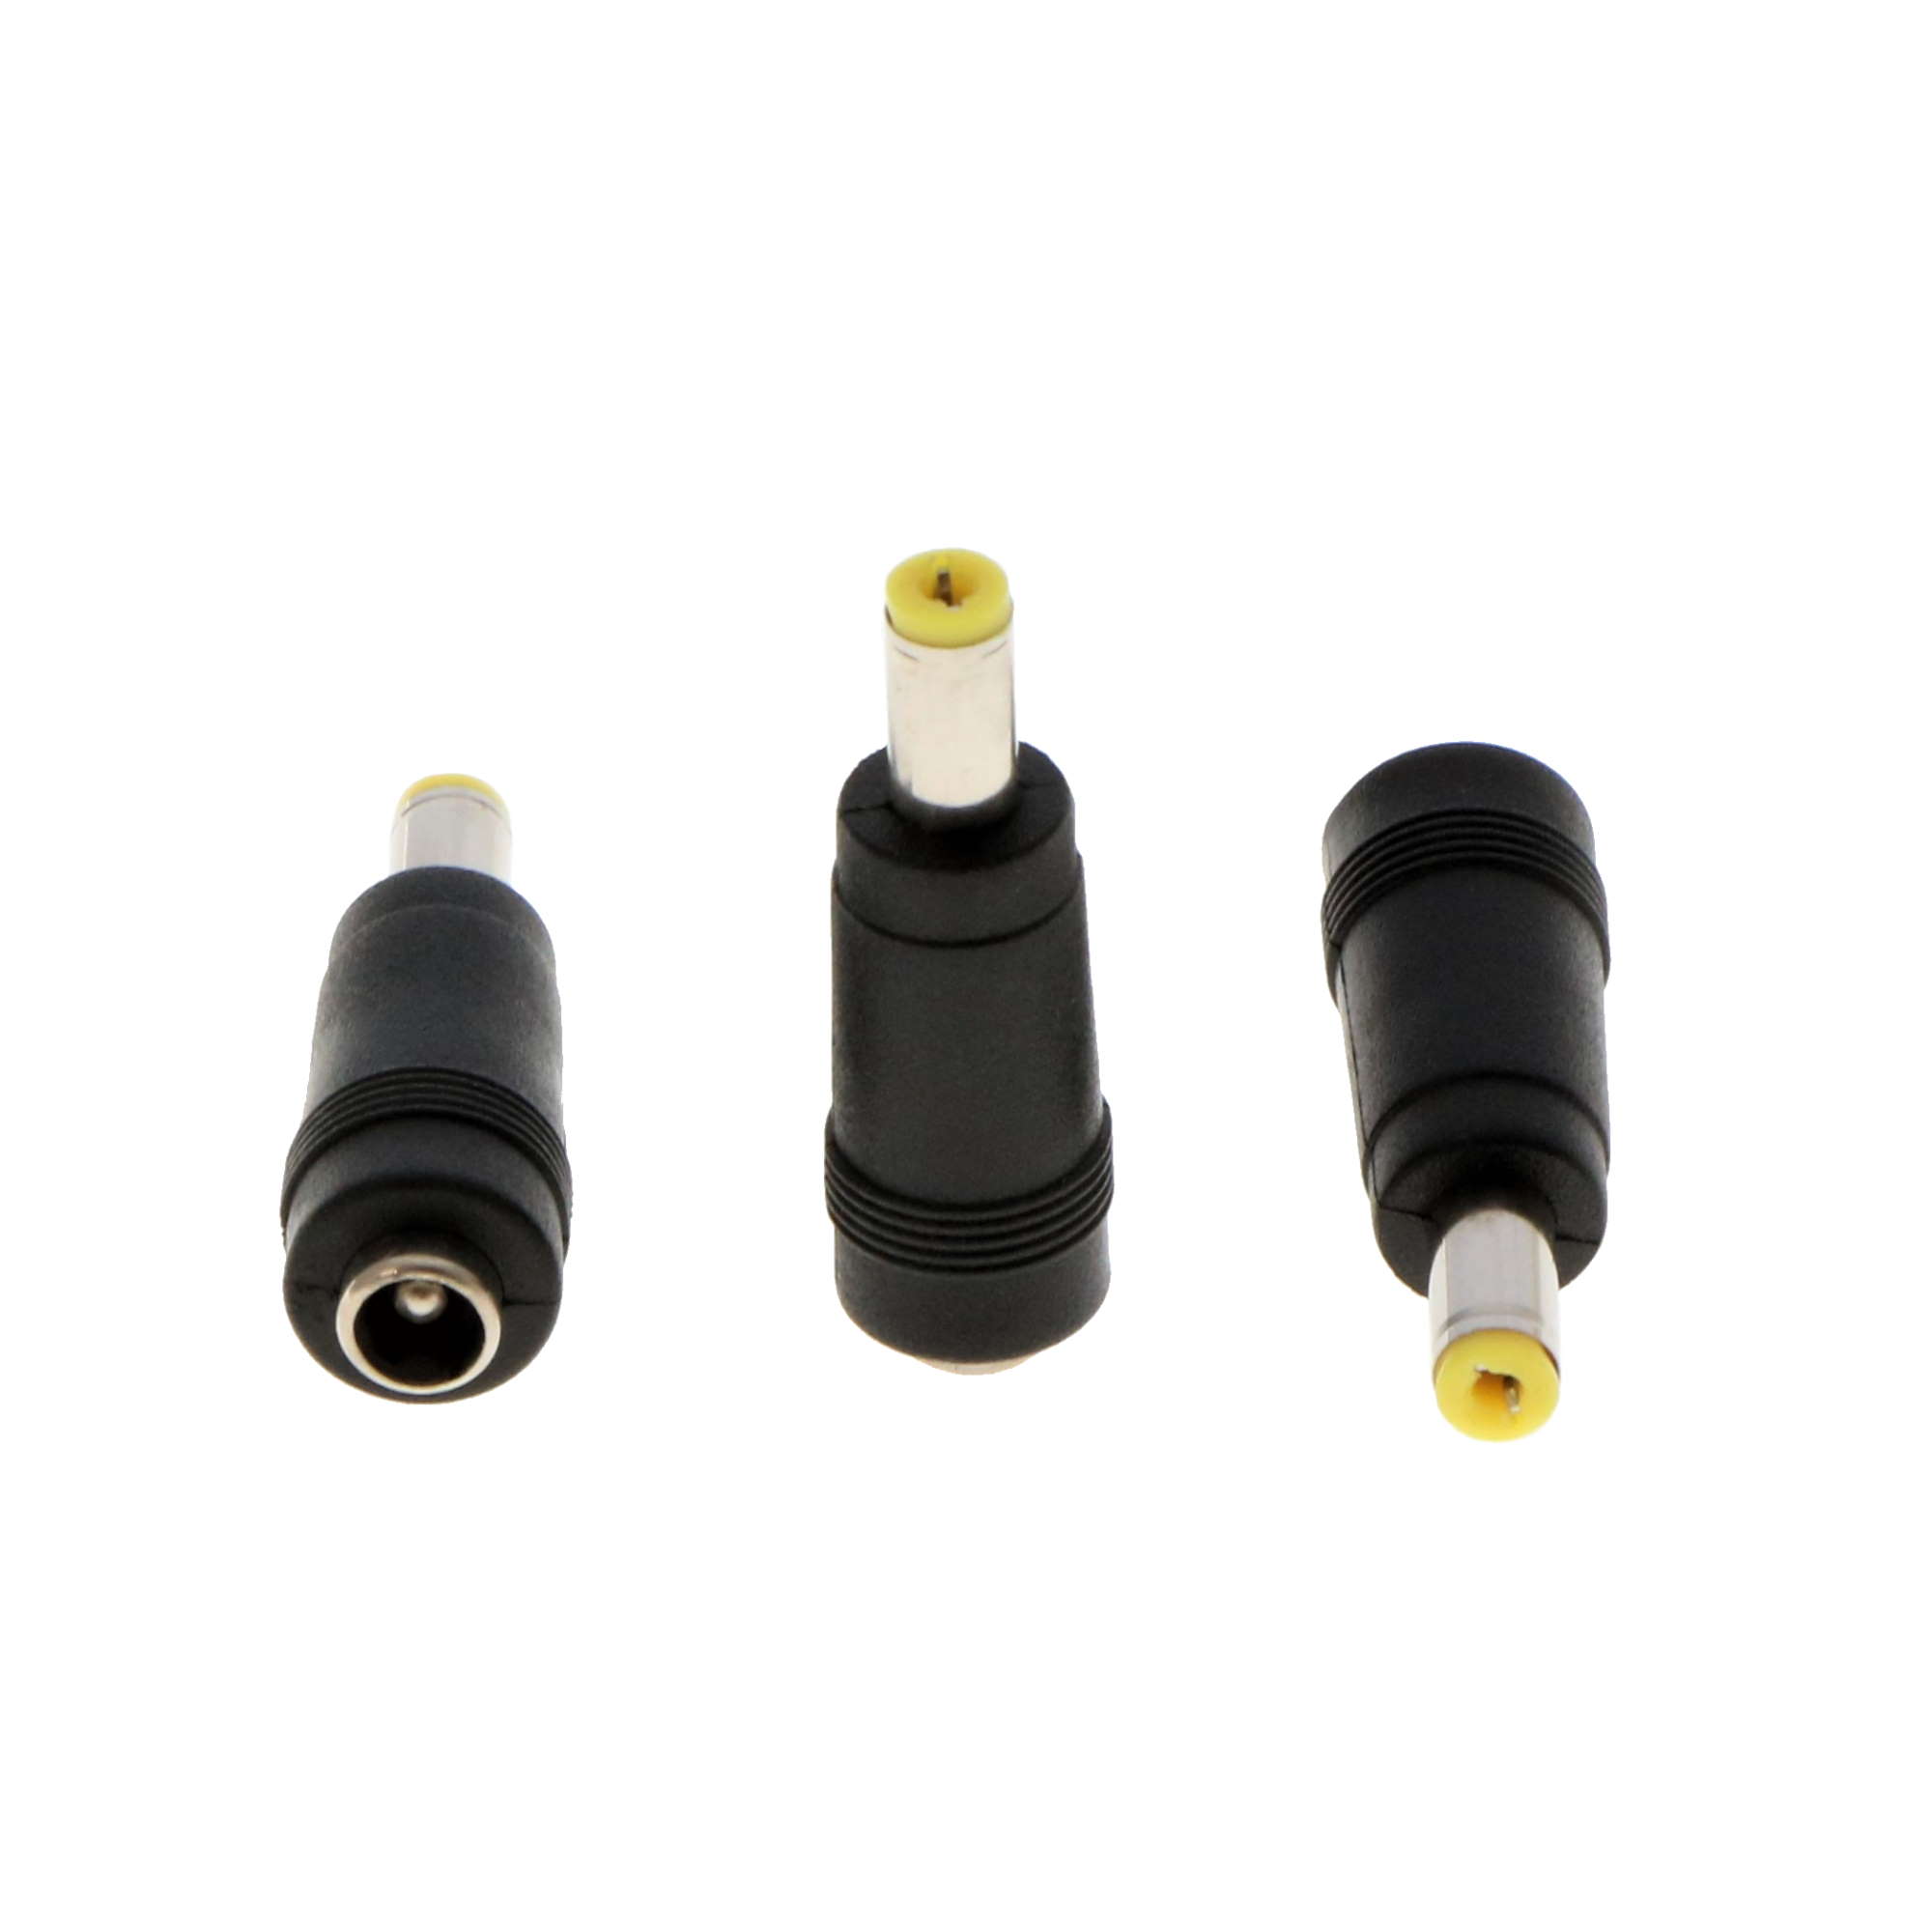 2.1mm Adapter (only for Birdcord PD)